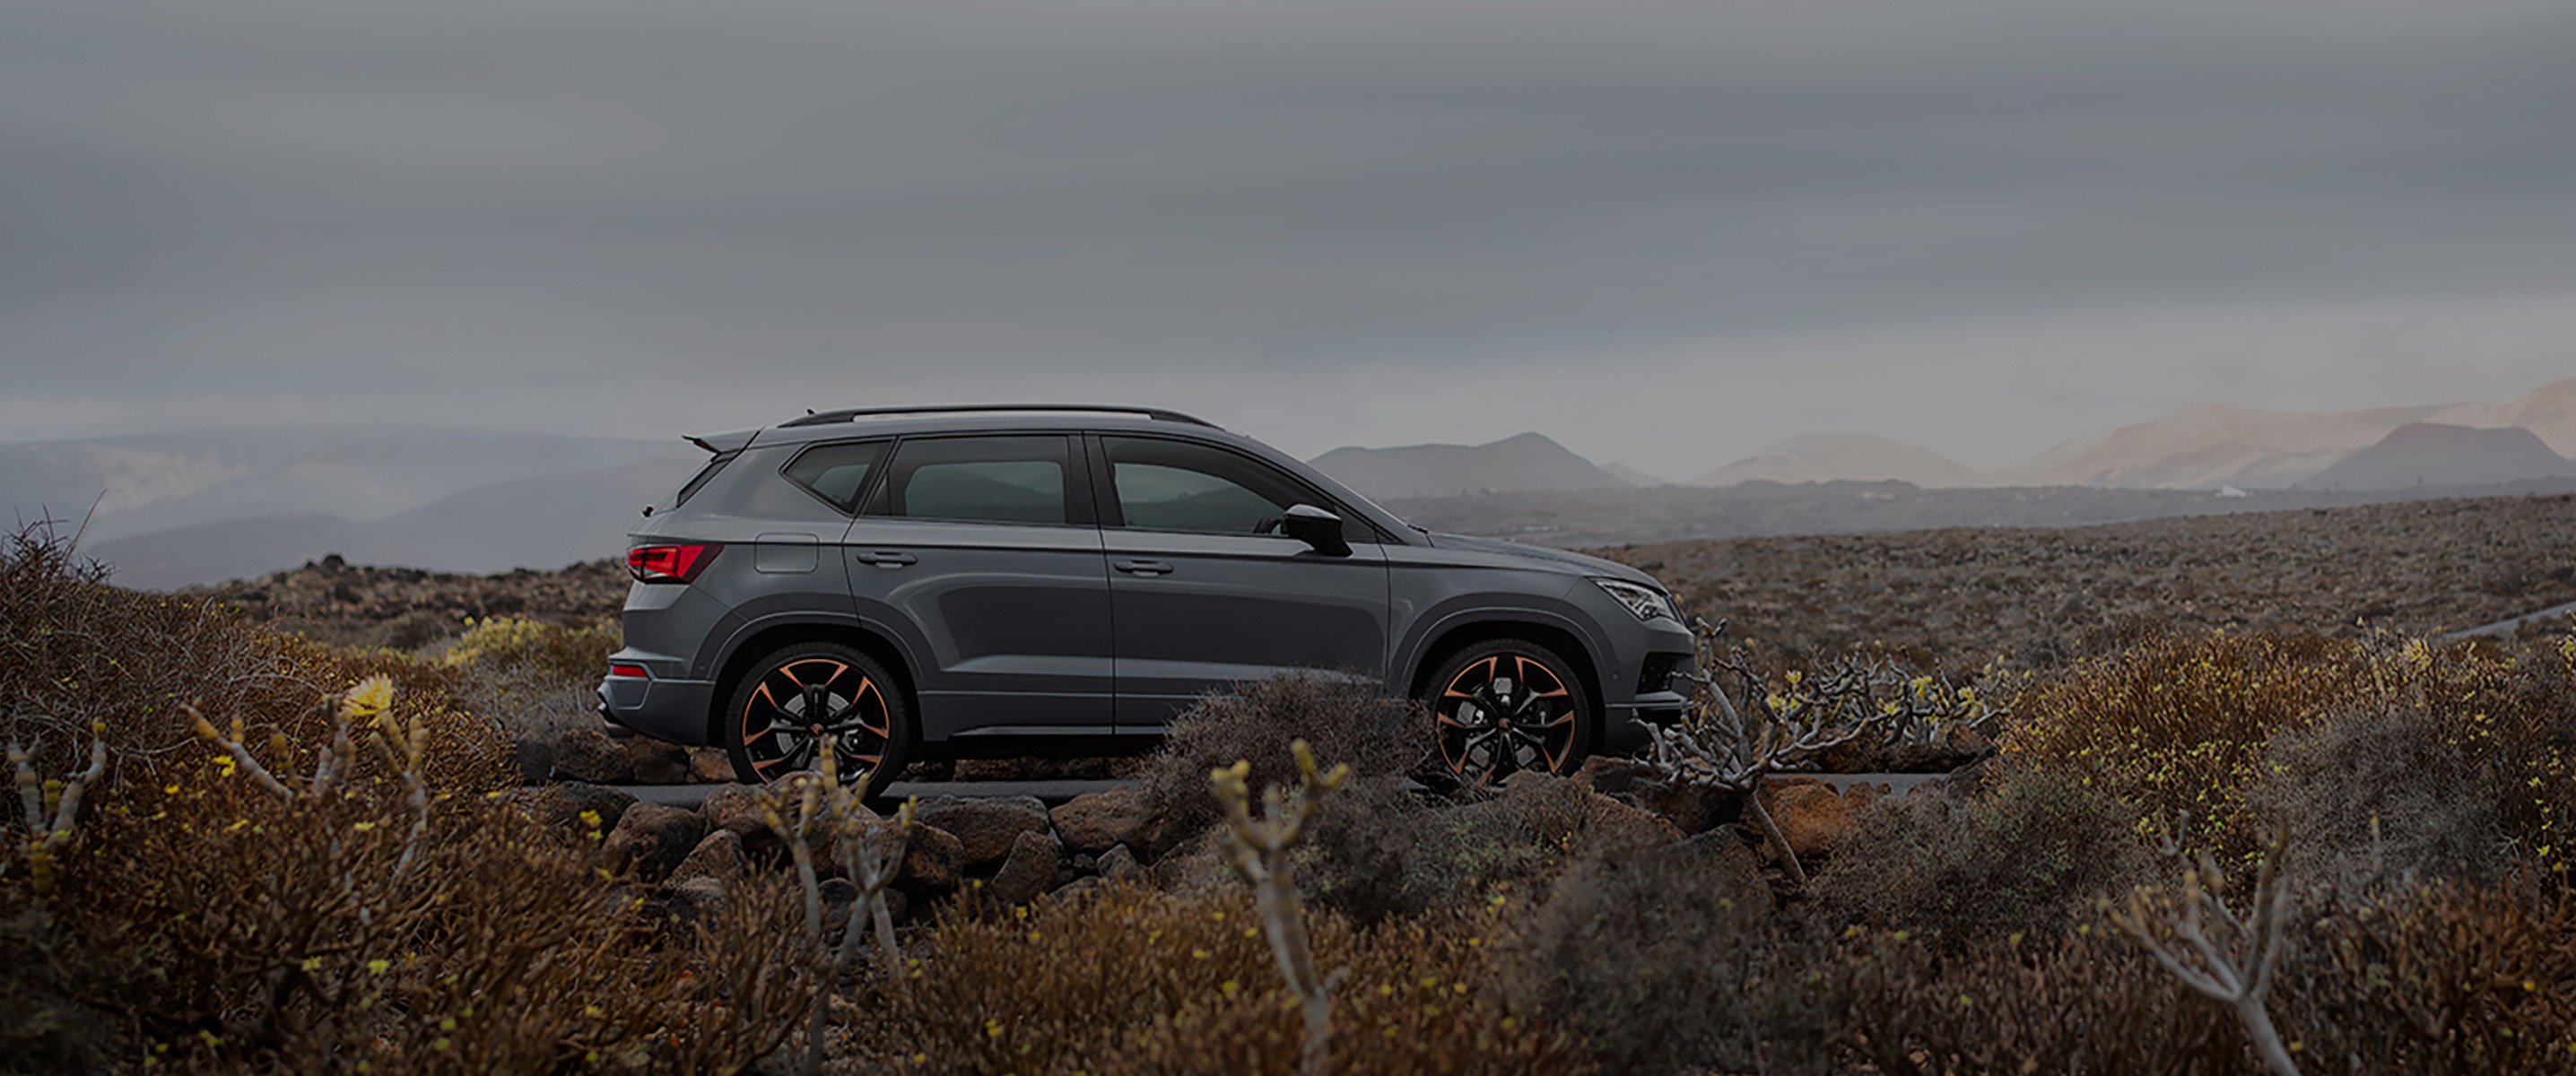 CUPRA Ateca Limited Edition side view